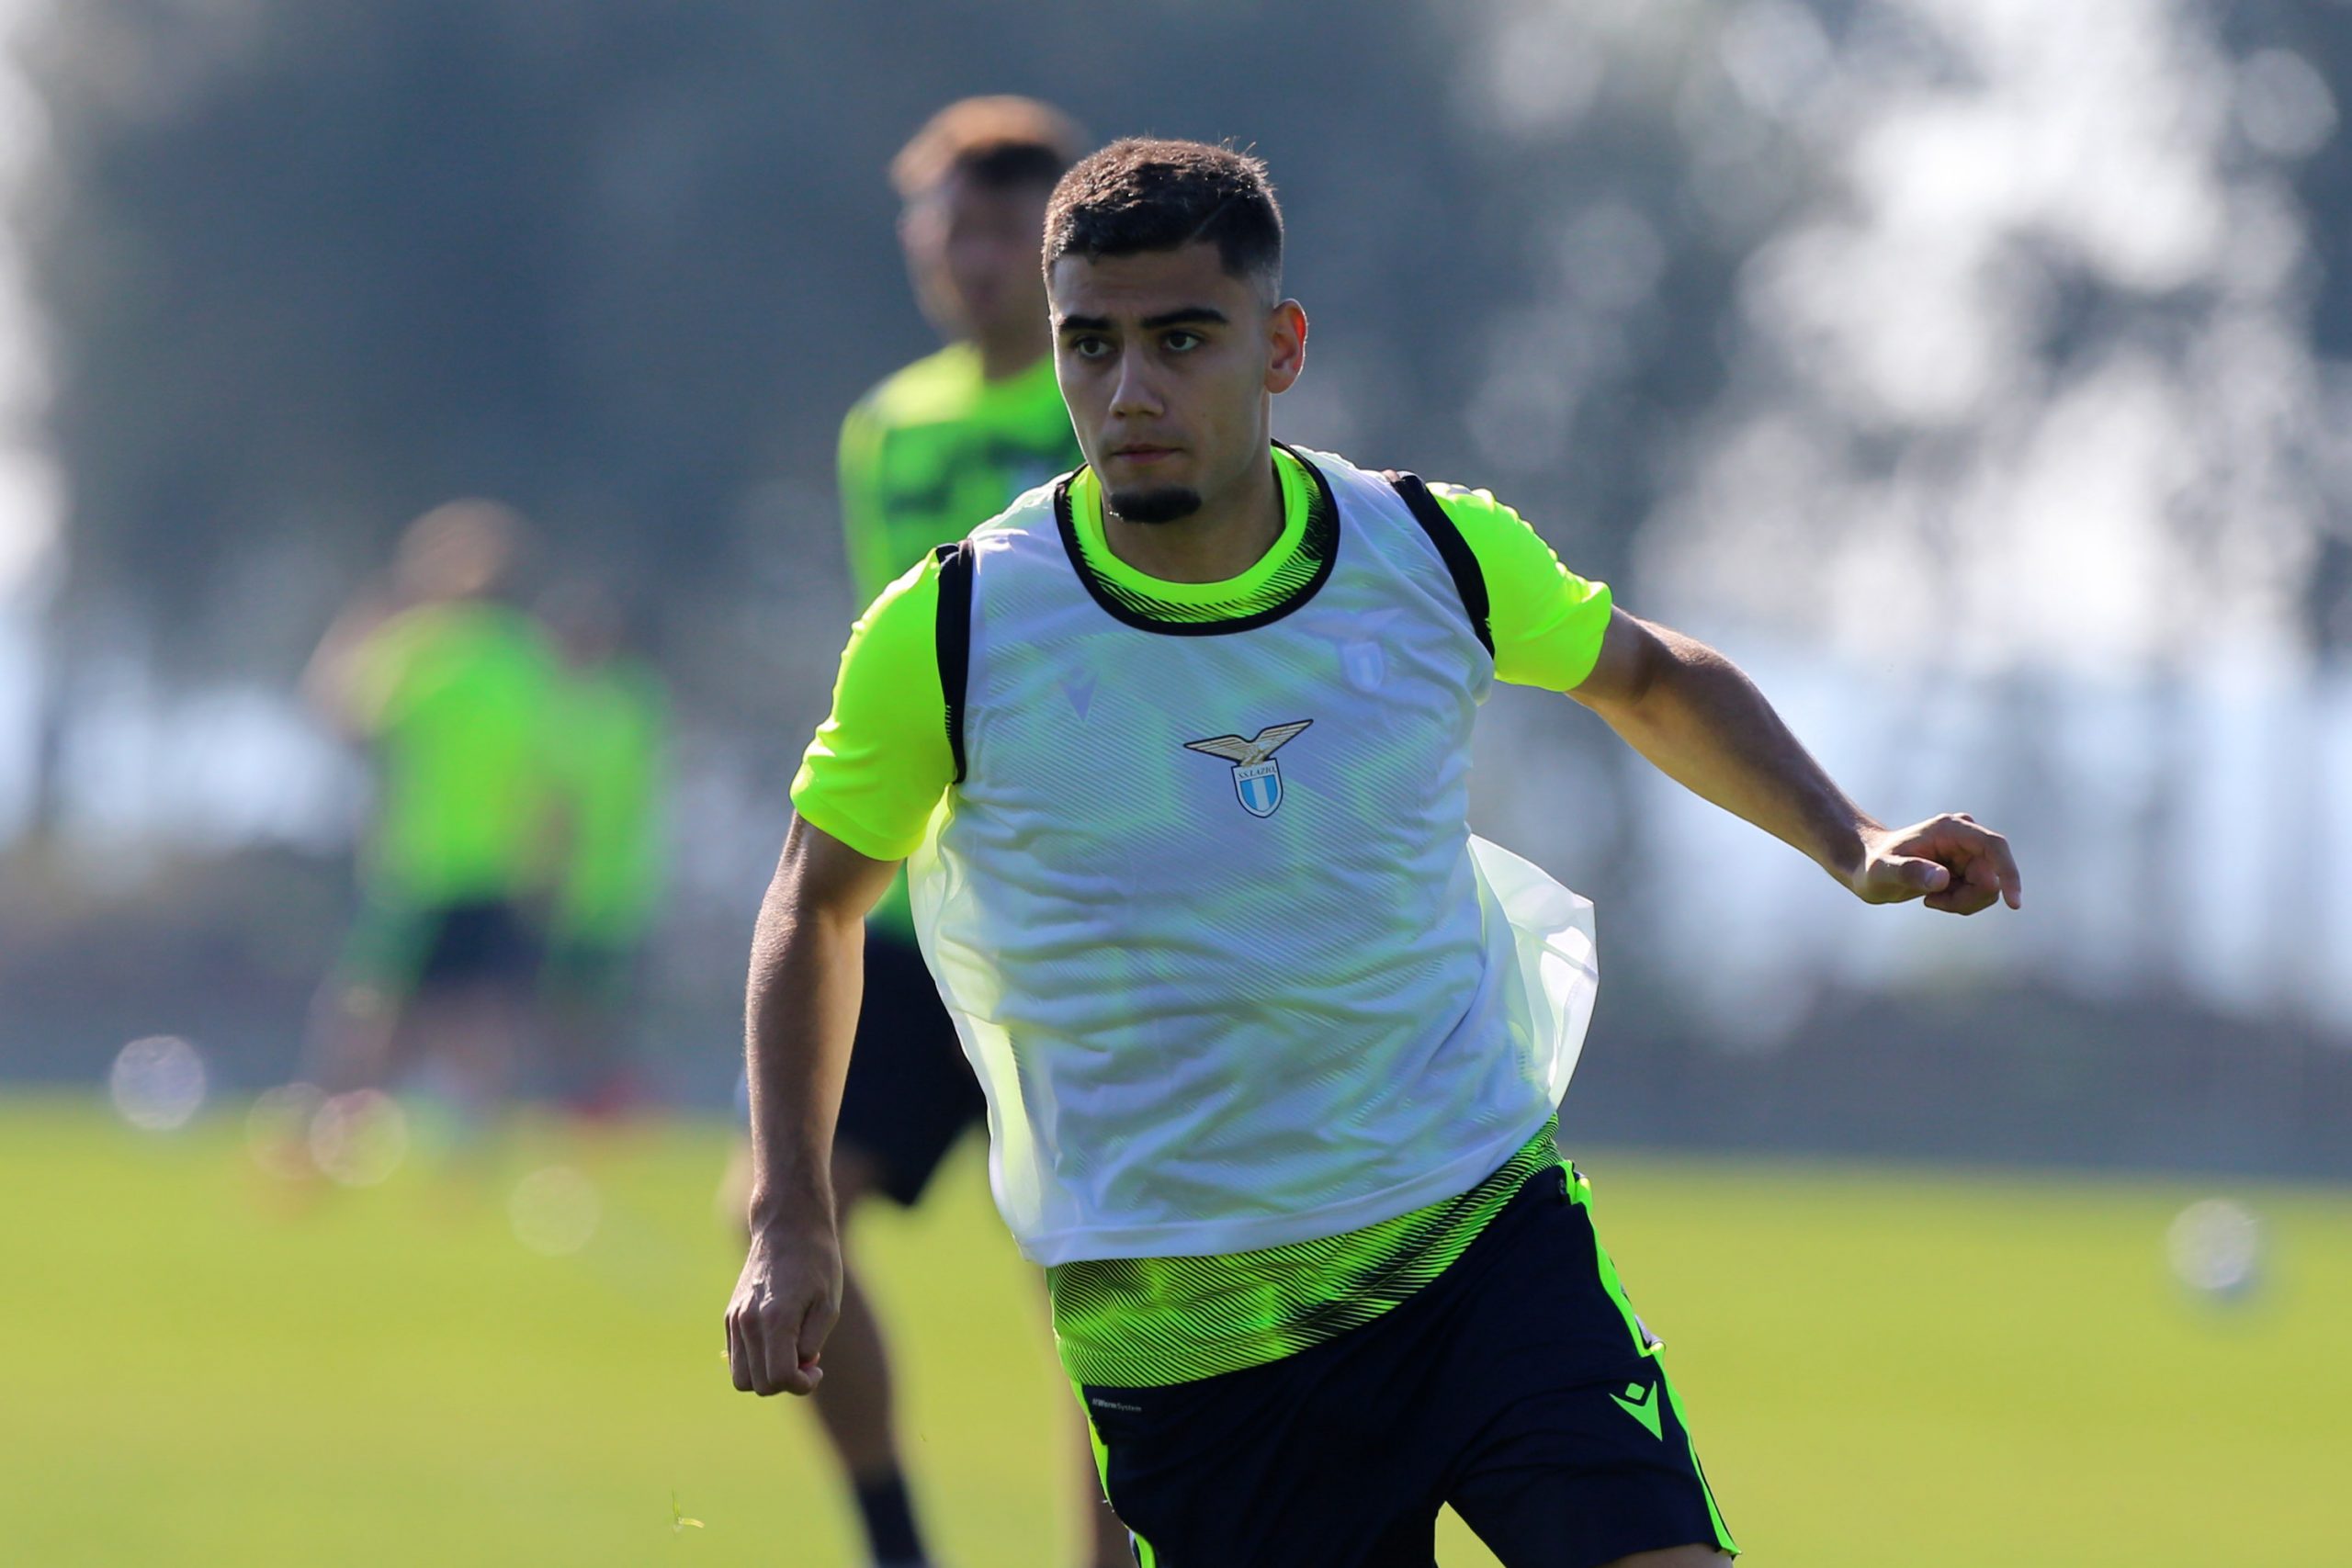 Manchester United midfielder Andreas Pereira is considering terminating loan spell at Lazio.